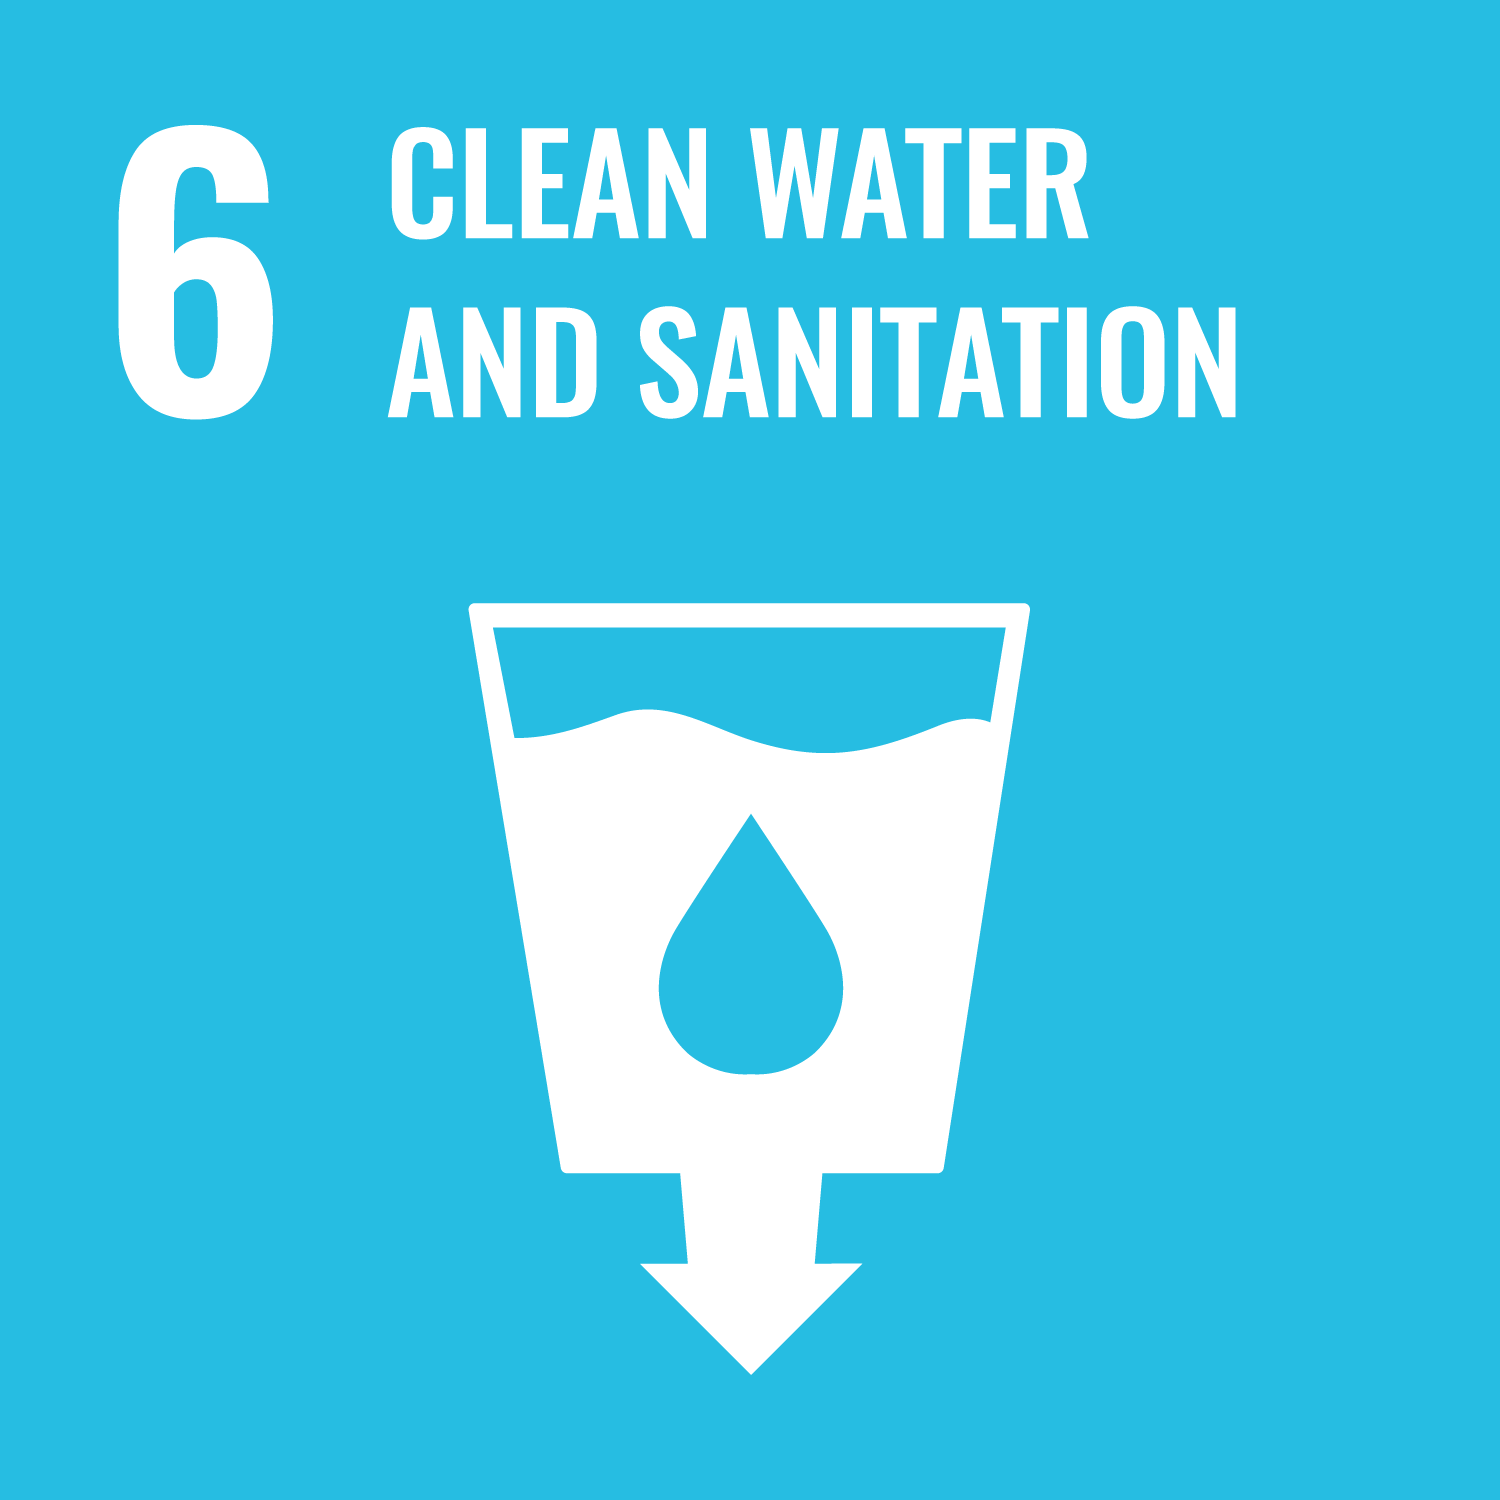 SDG number 6 Clean water and sanitation